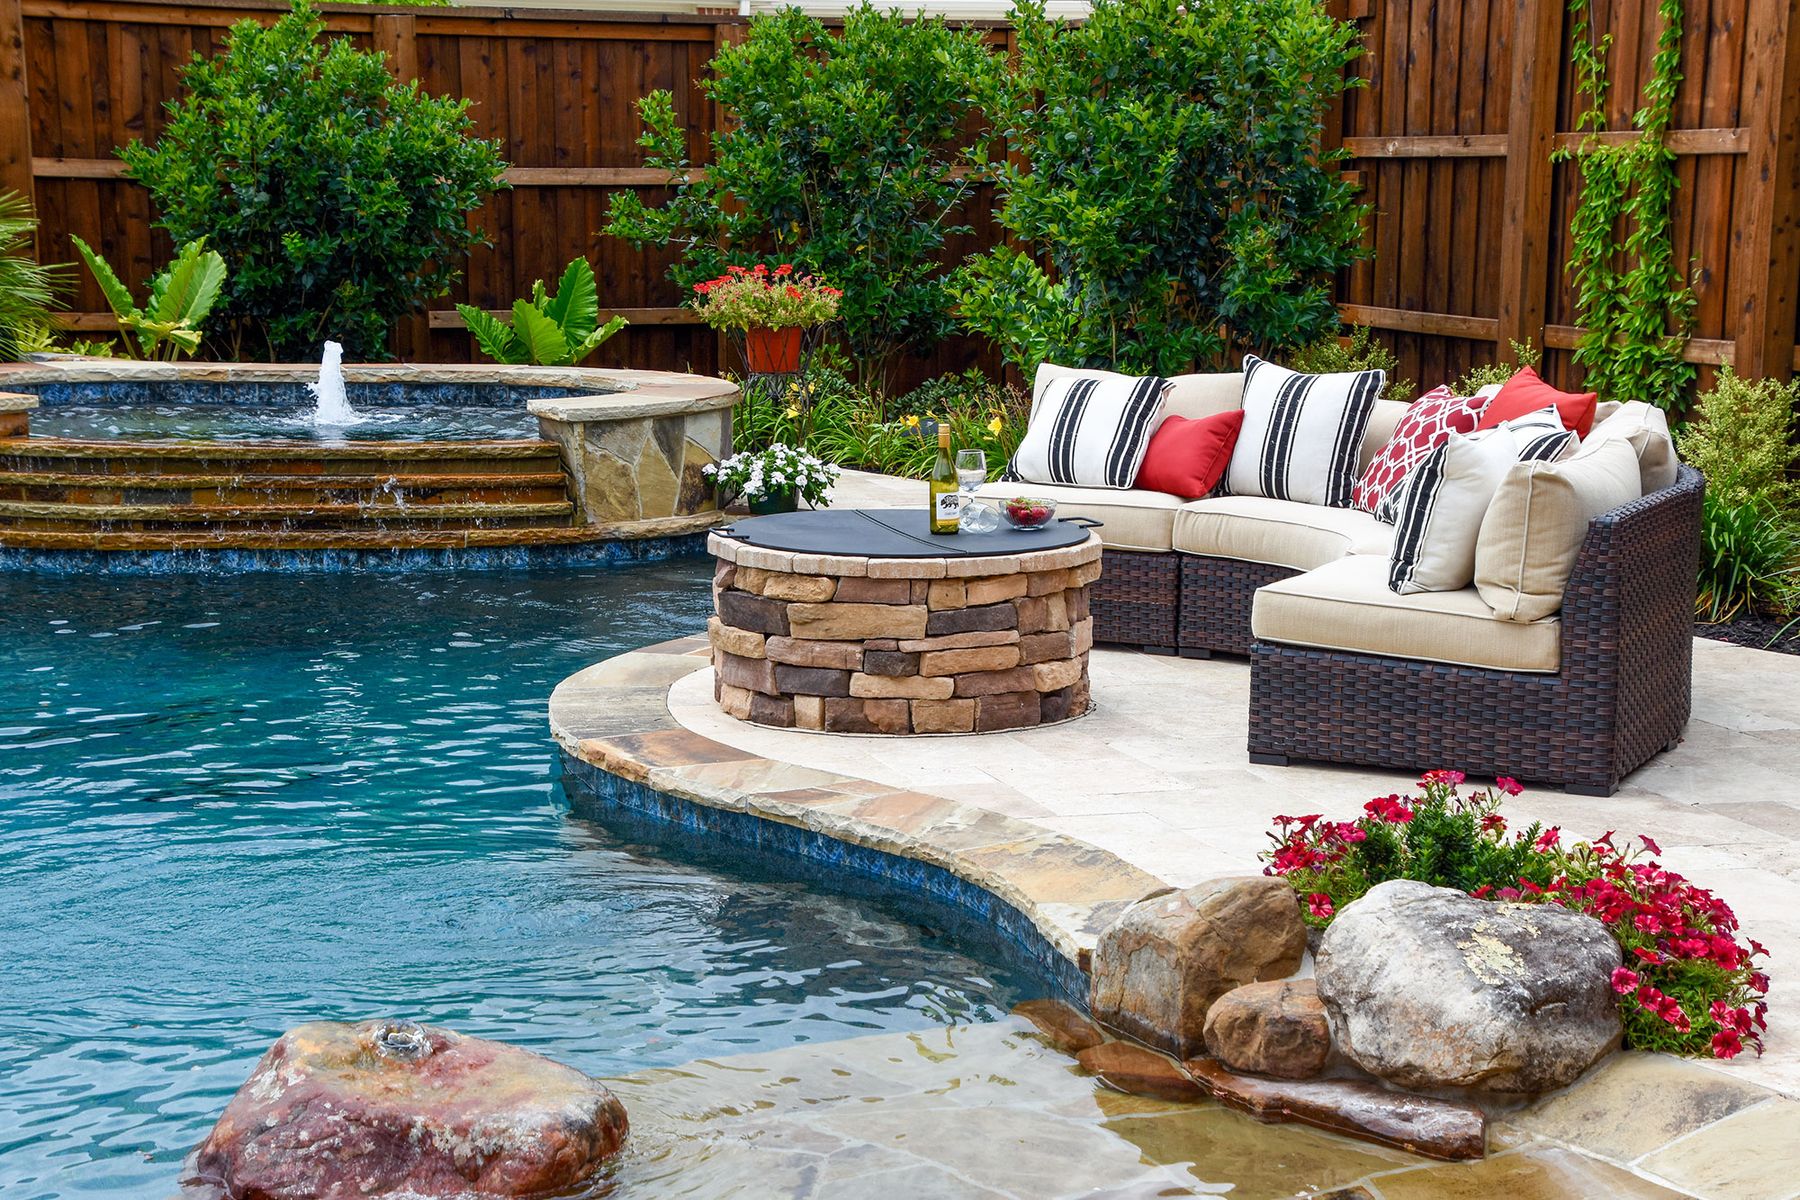 Schmidlap Residence Fire Pit and Jacuzzi